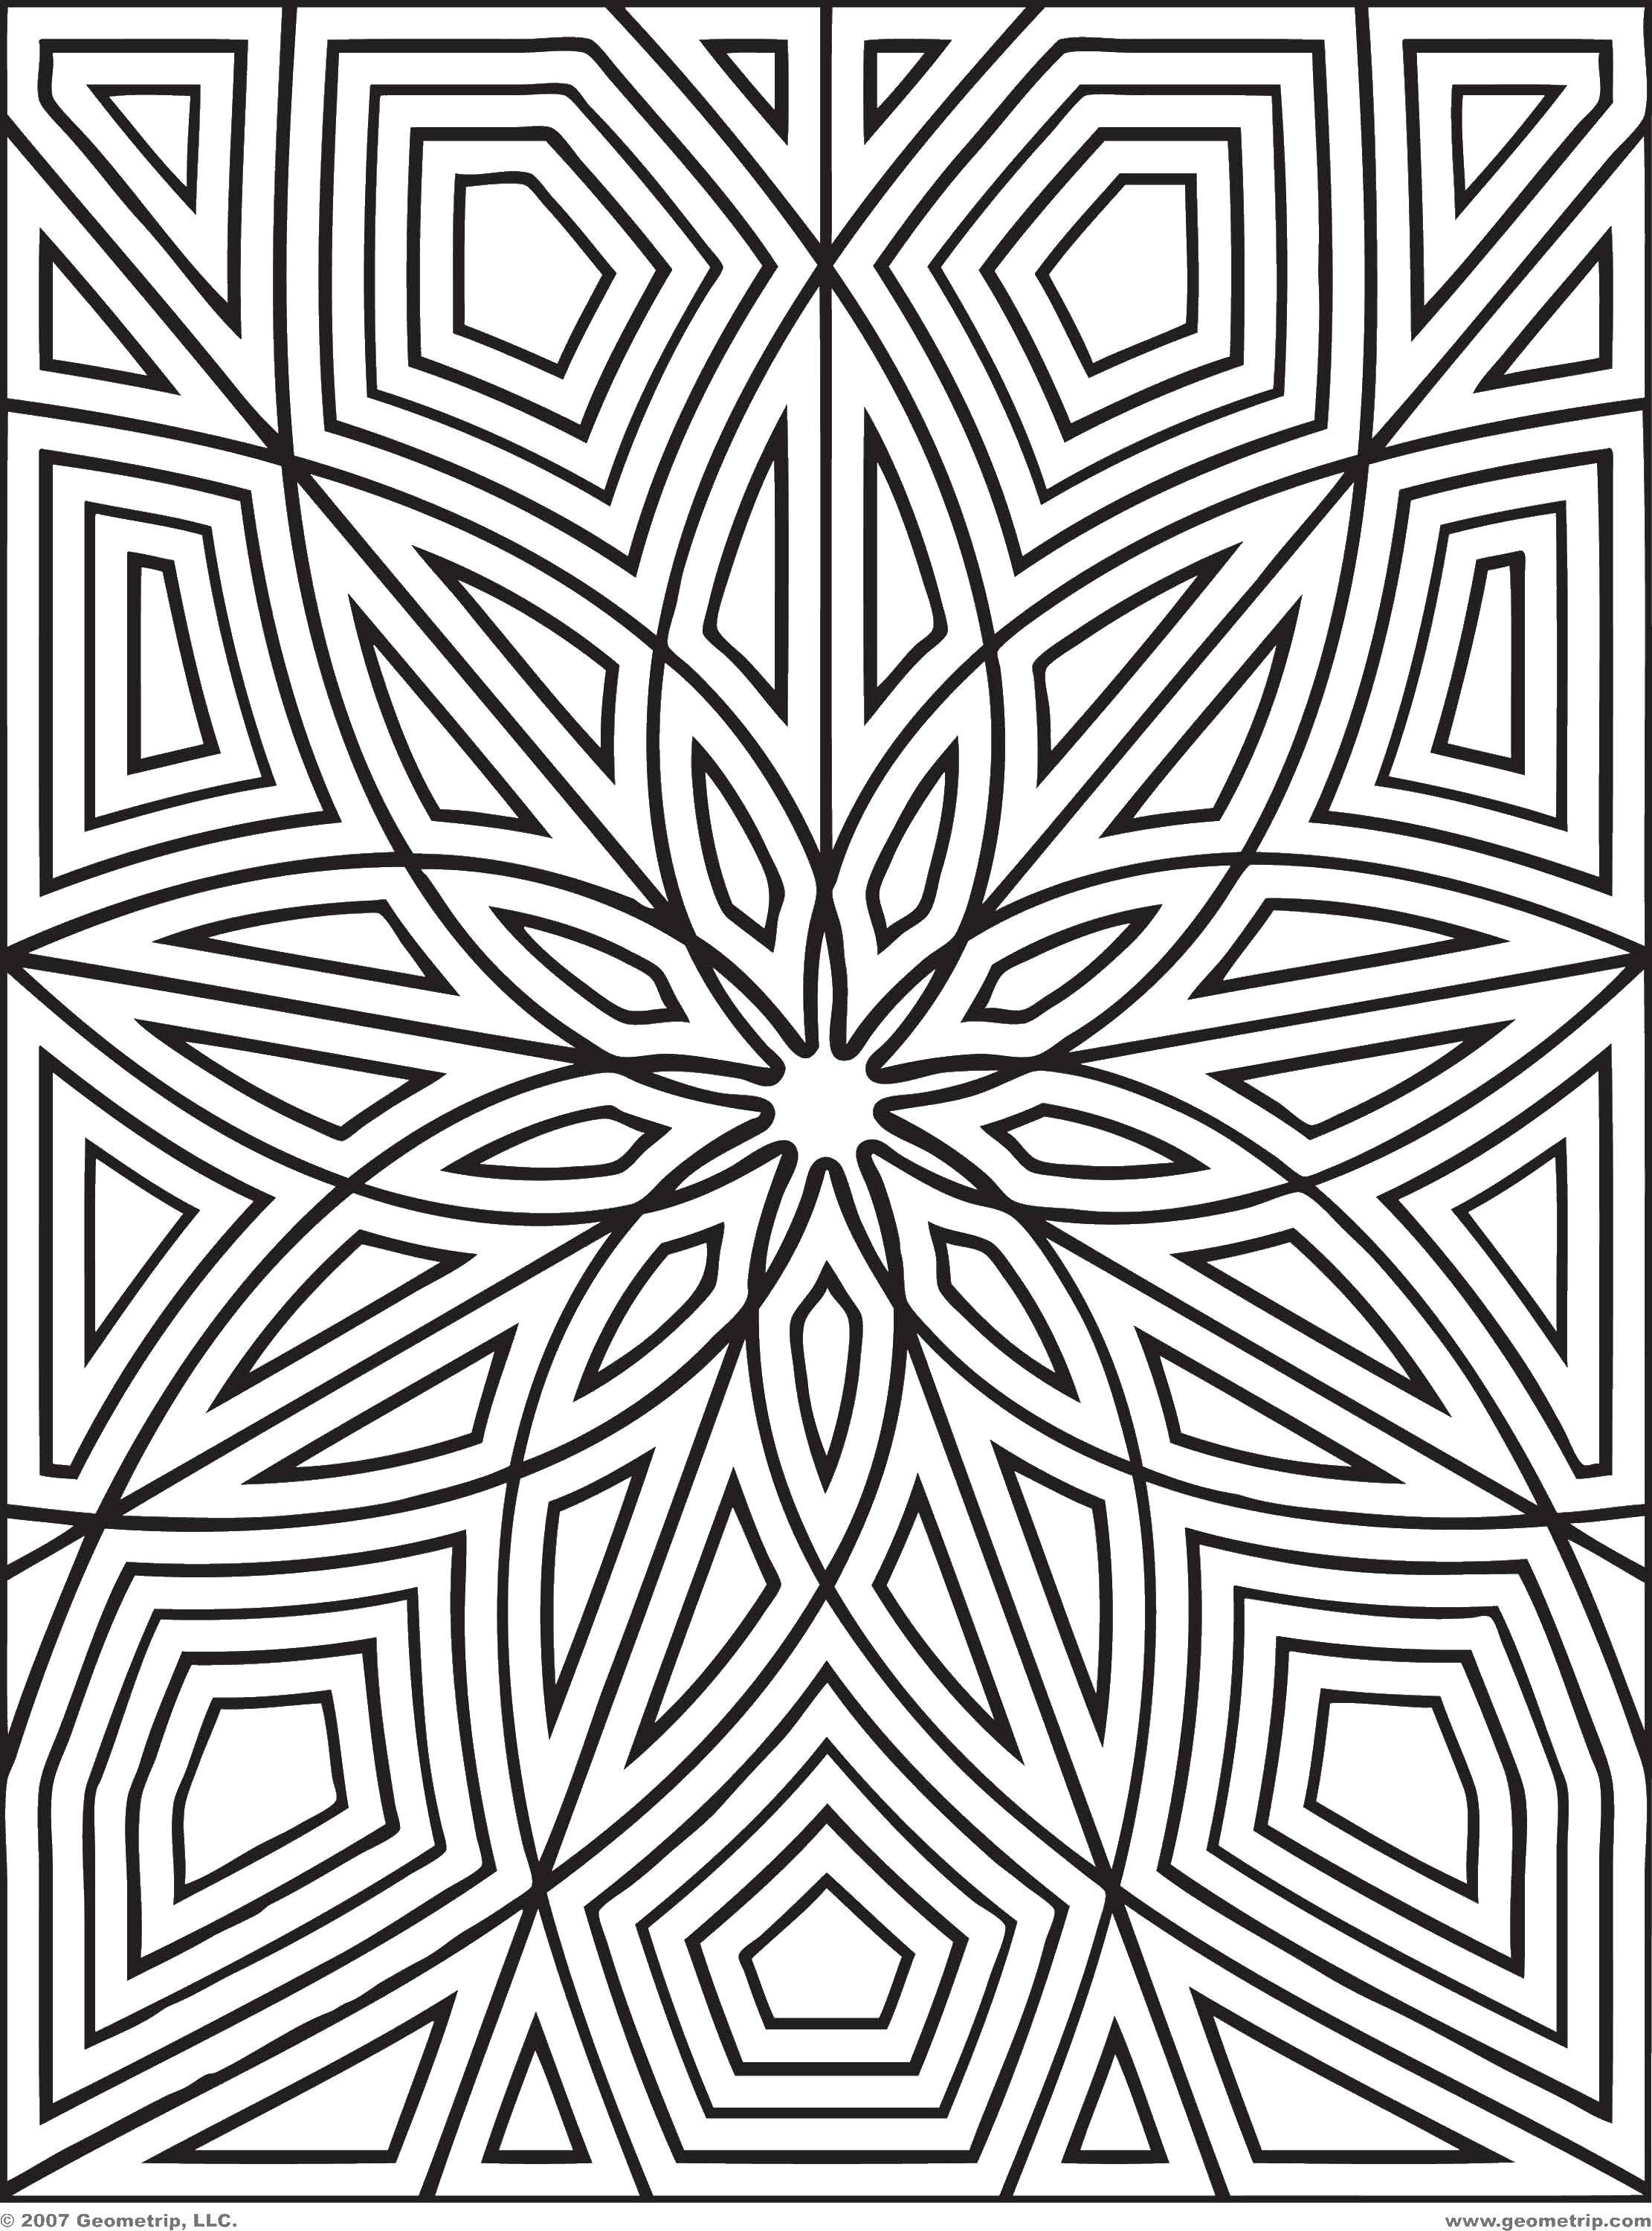 Coloring Geometric patterns. Category Patterns with flowers. Tags:  Patterns, geometric.